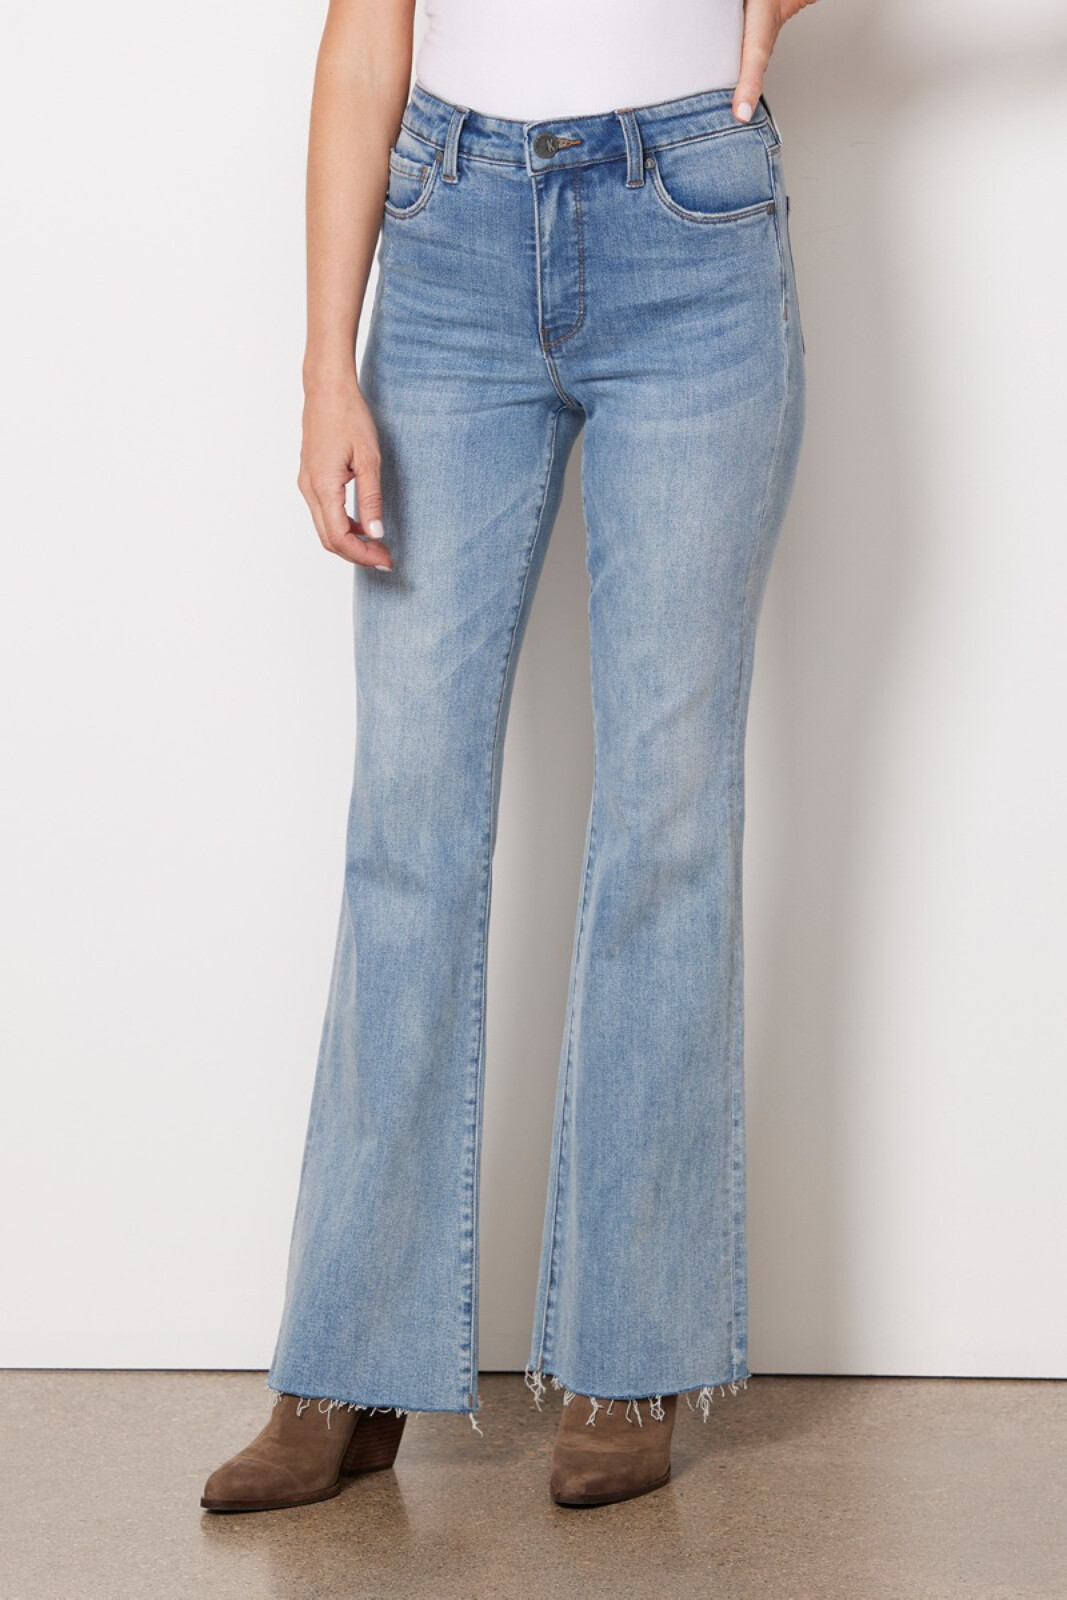 KUT FROM THE KLOTH Ana High Rise Flare Jean | EVEREVE